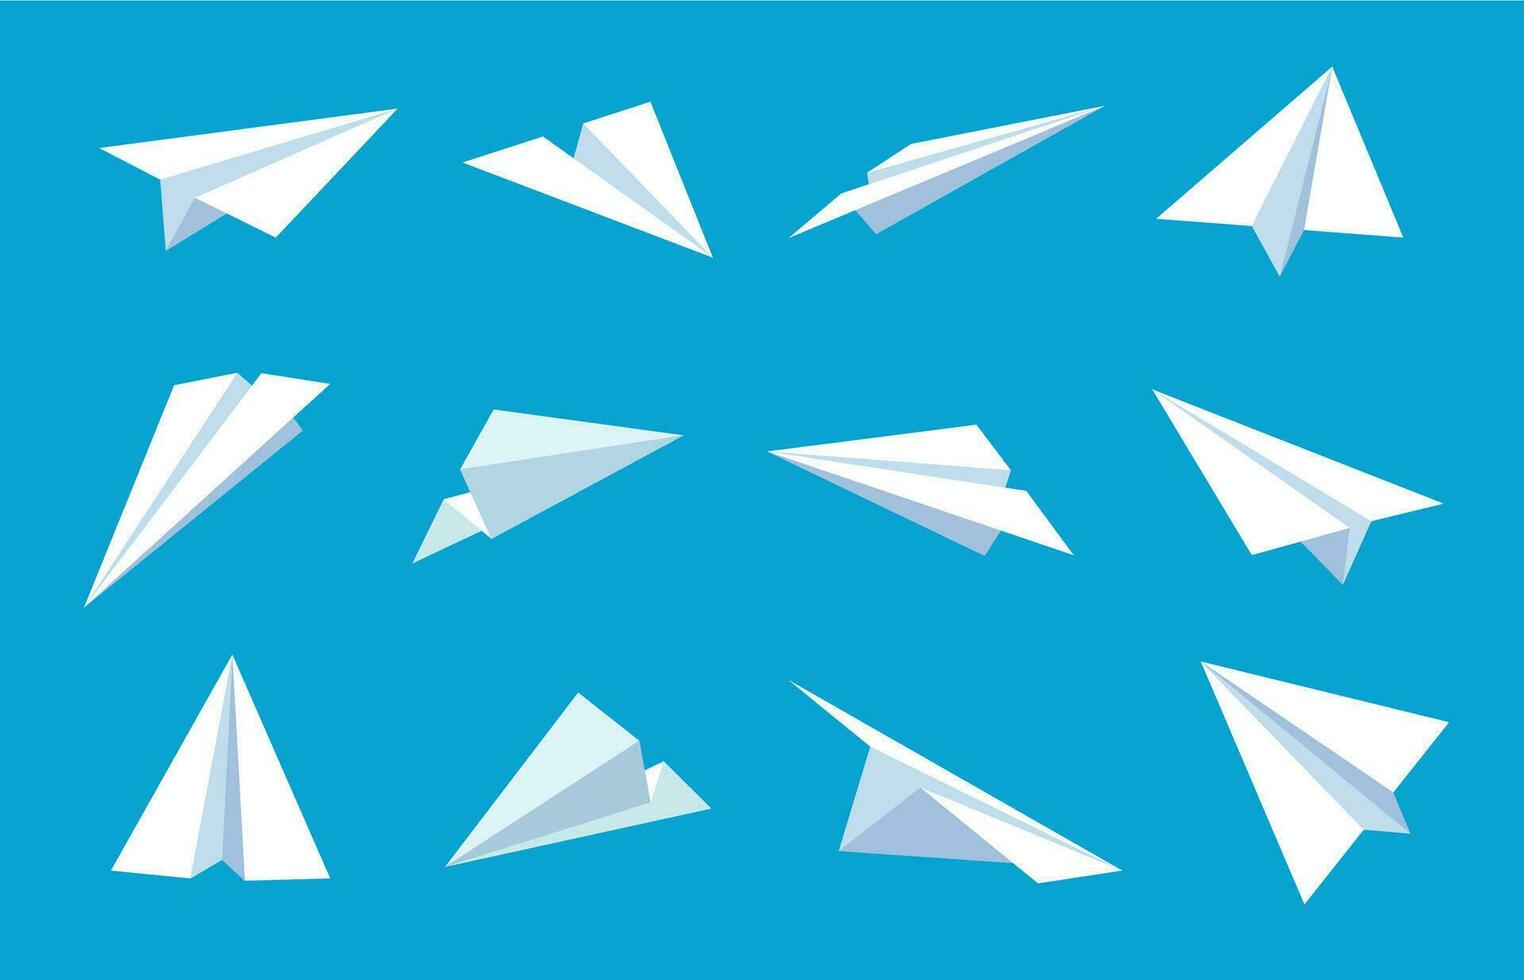 Paper plane. Flying planes in blue sky, white paper airplanes from different angles and direction, message or traveling flat vector symbols